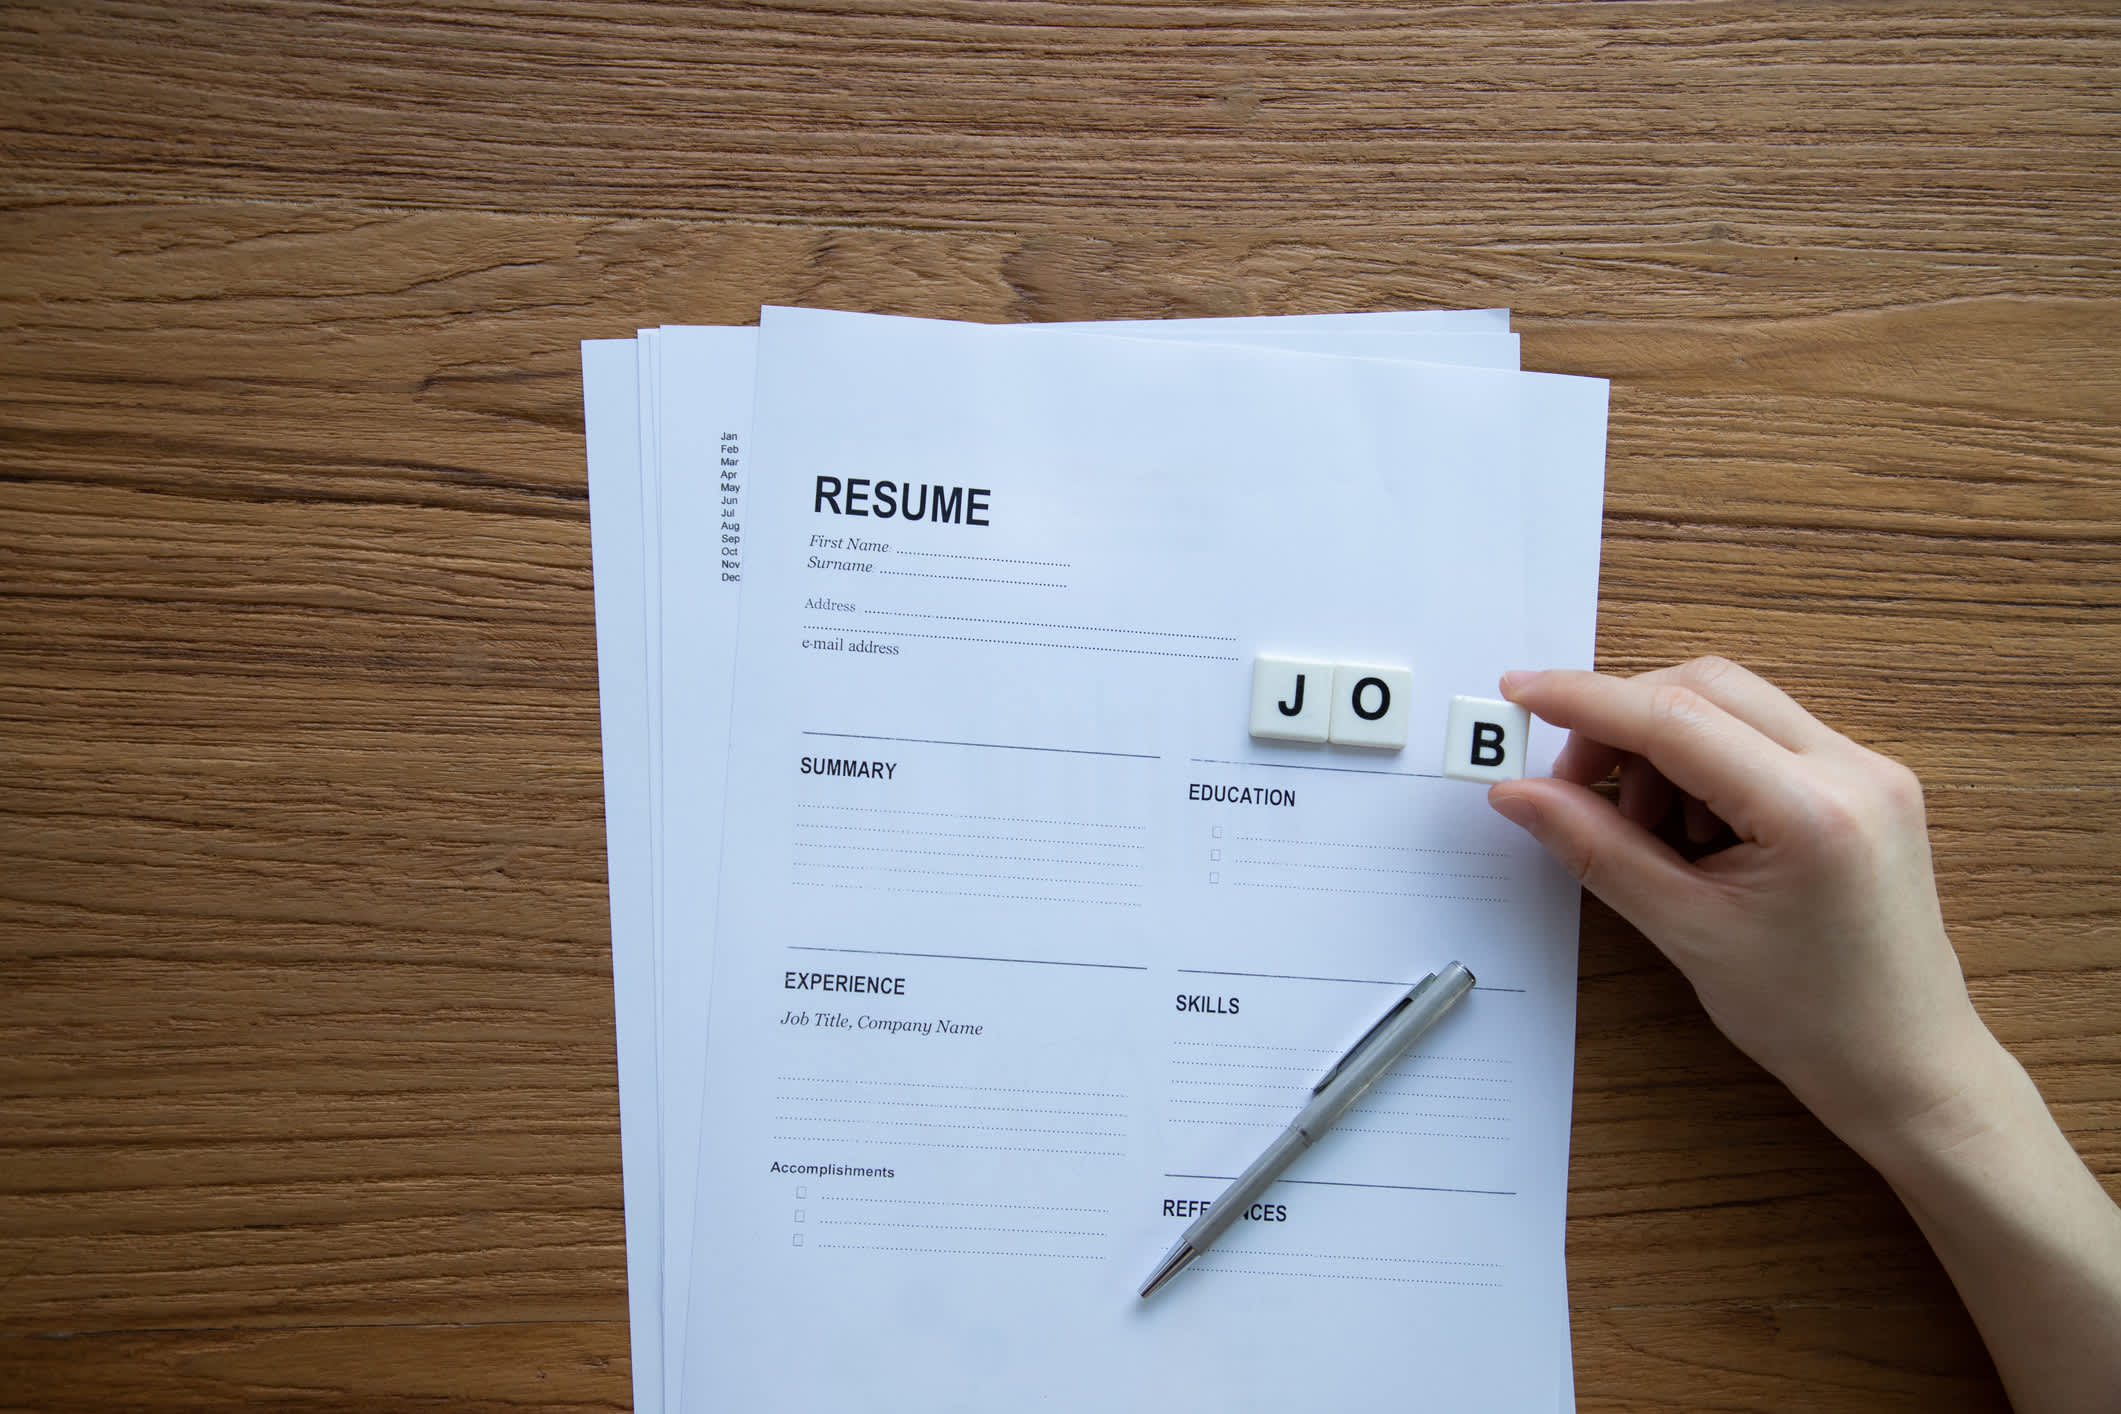 The Upside Down CV - How Your Interests and Activities Could Land You Your Next Jo